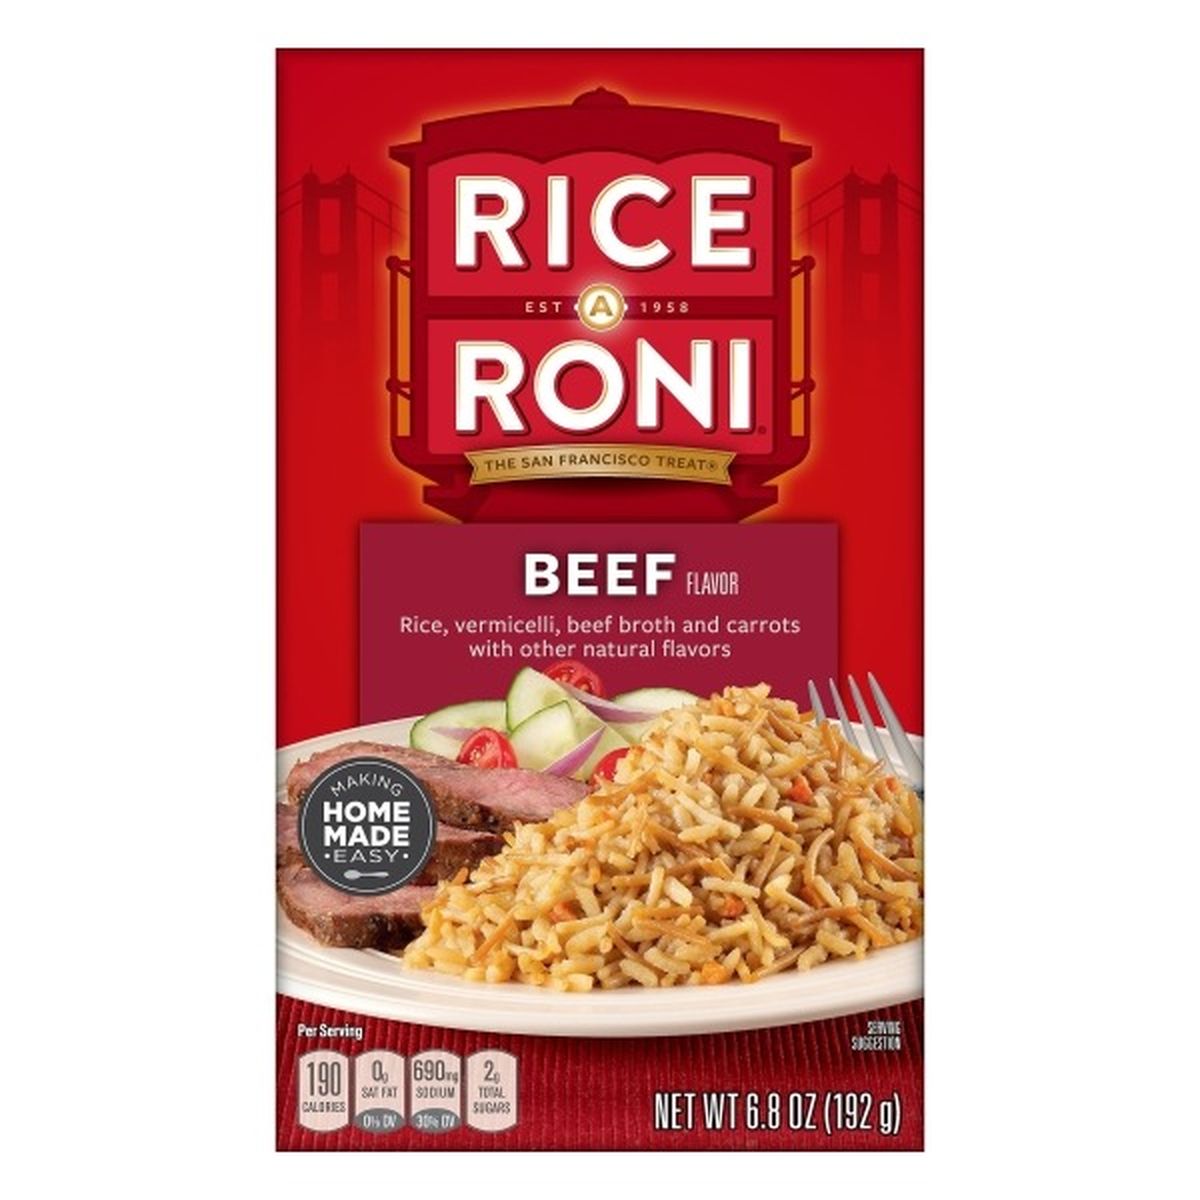 Calories in Rice-a-Roni Food Mix, Beef Flavor